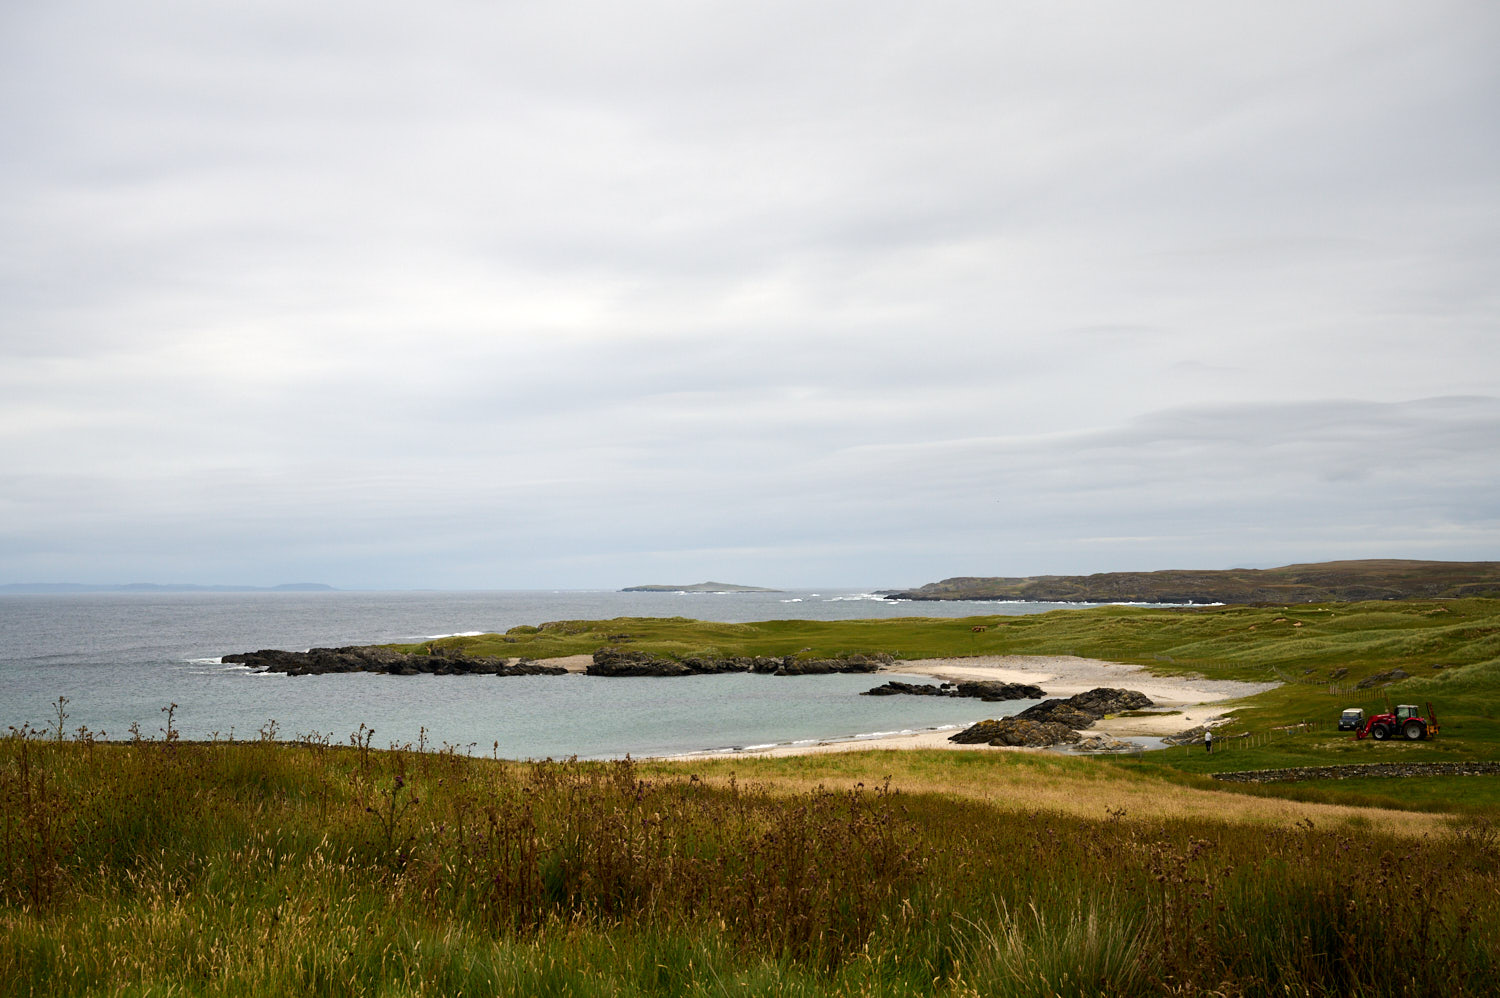 Taking a tour around Rinns of islay, from Lossit Bay back to Port Charlotte